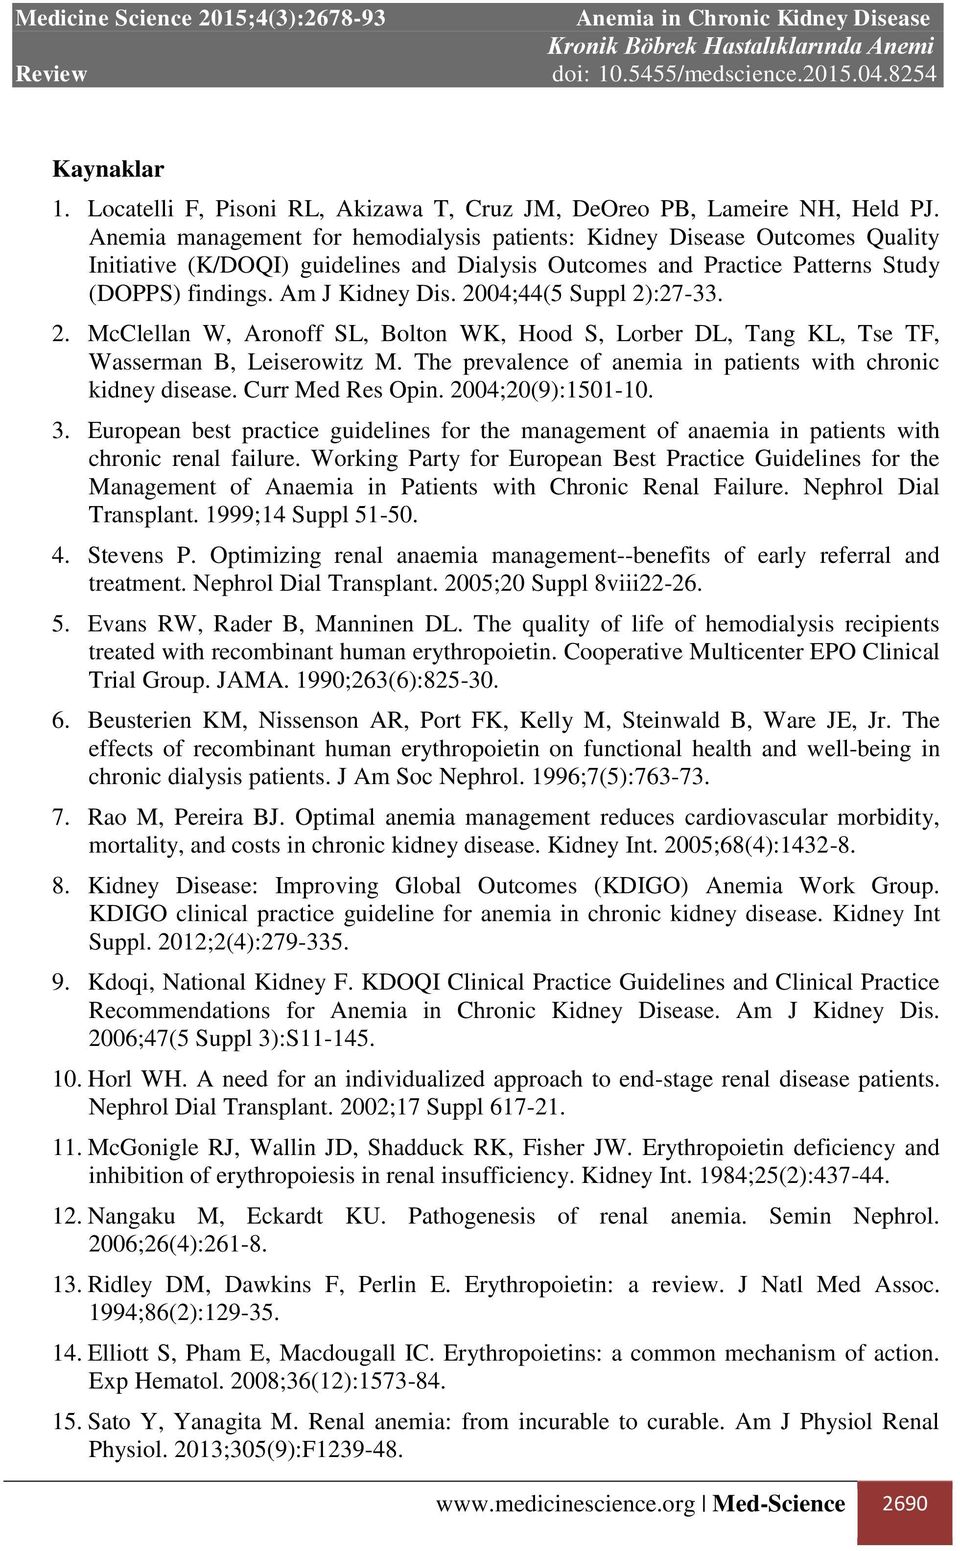 2004;44(5 Suppl 2):27-33. 2. McClellan W, Aronoff SL, Bolton WK, Hood S, Lorber DL, Tang KL, Tse TF, Wasserman B, Leiserowitz M. The prevalence of anemia in patients with chronic kidney disease.